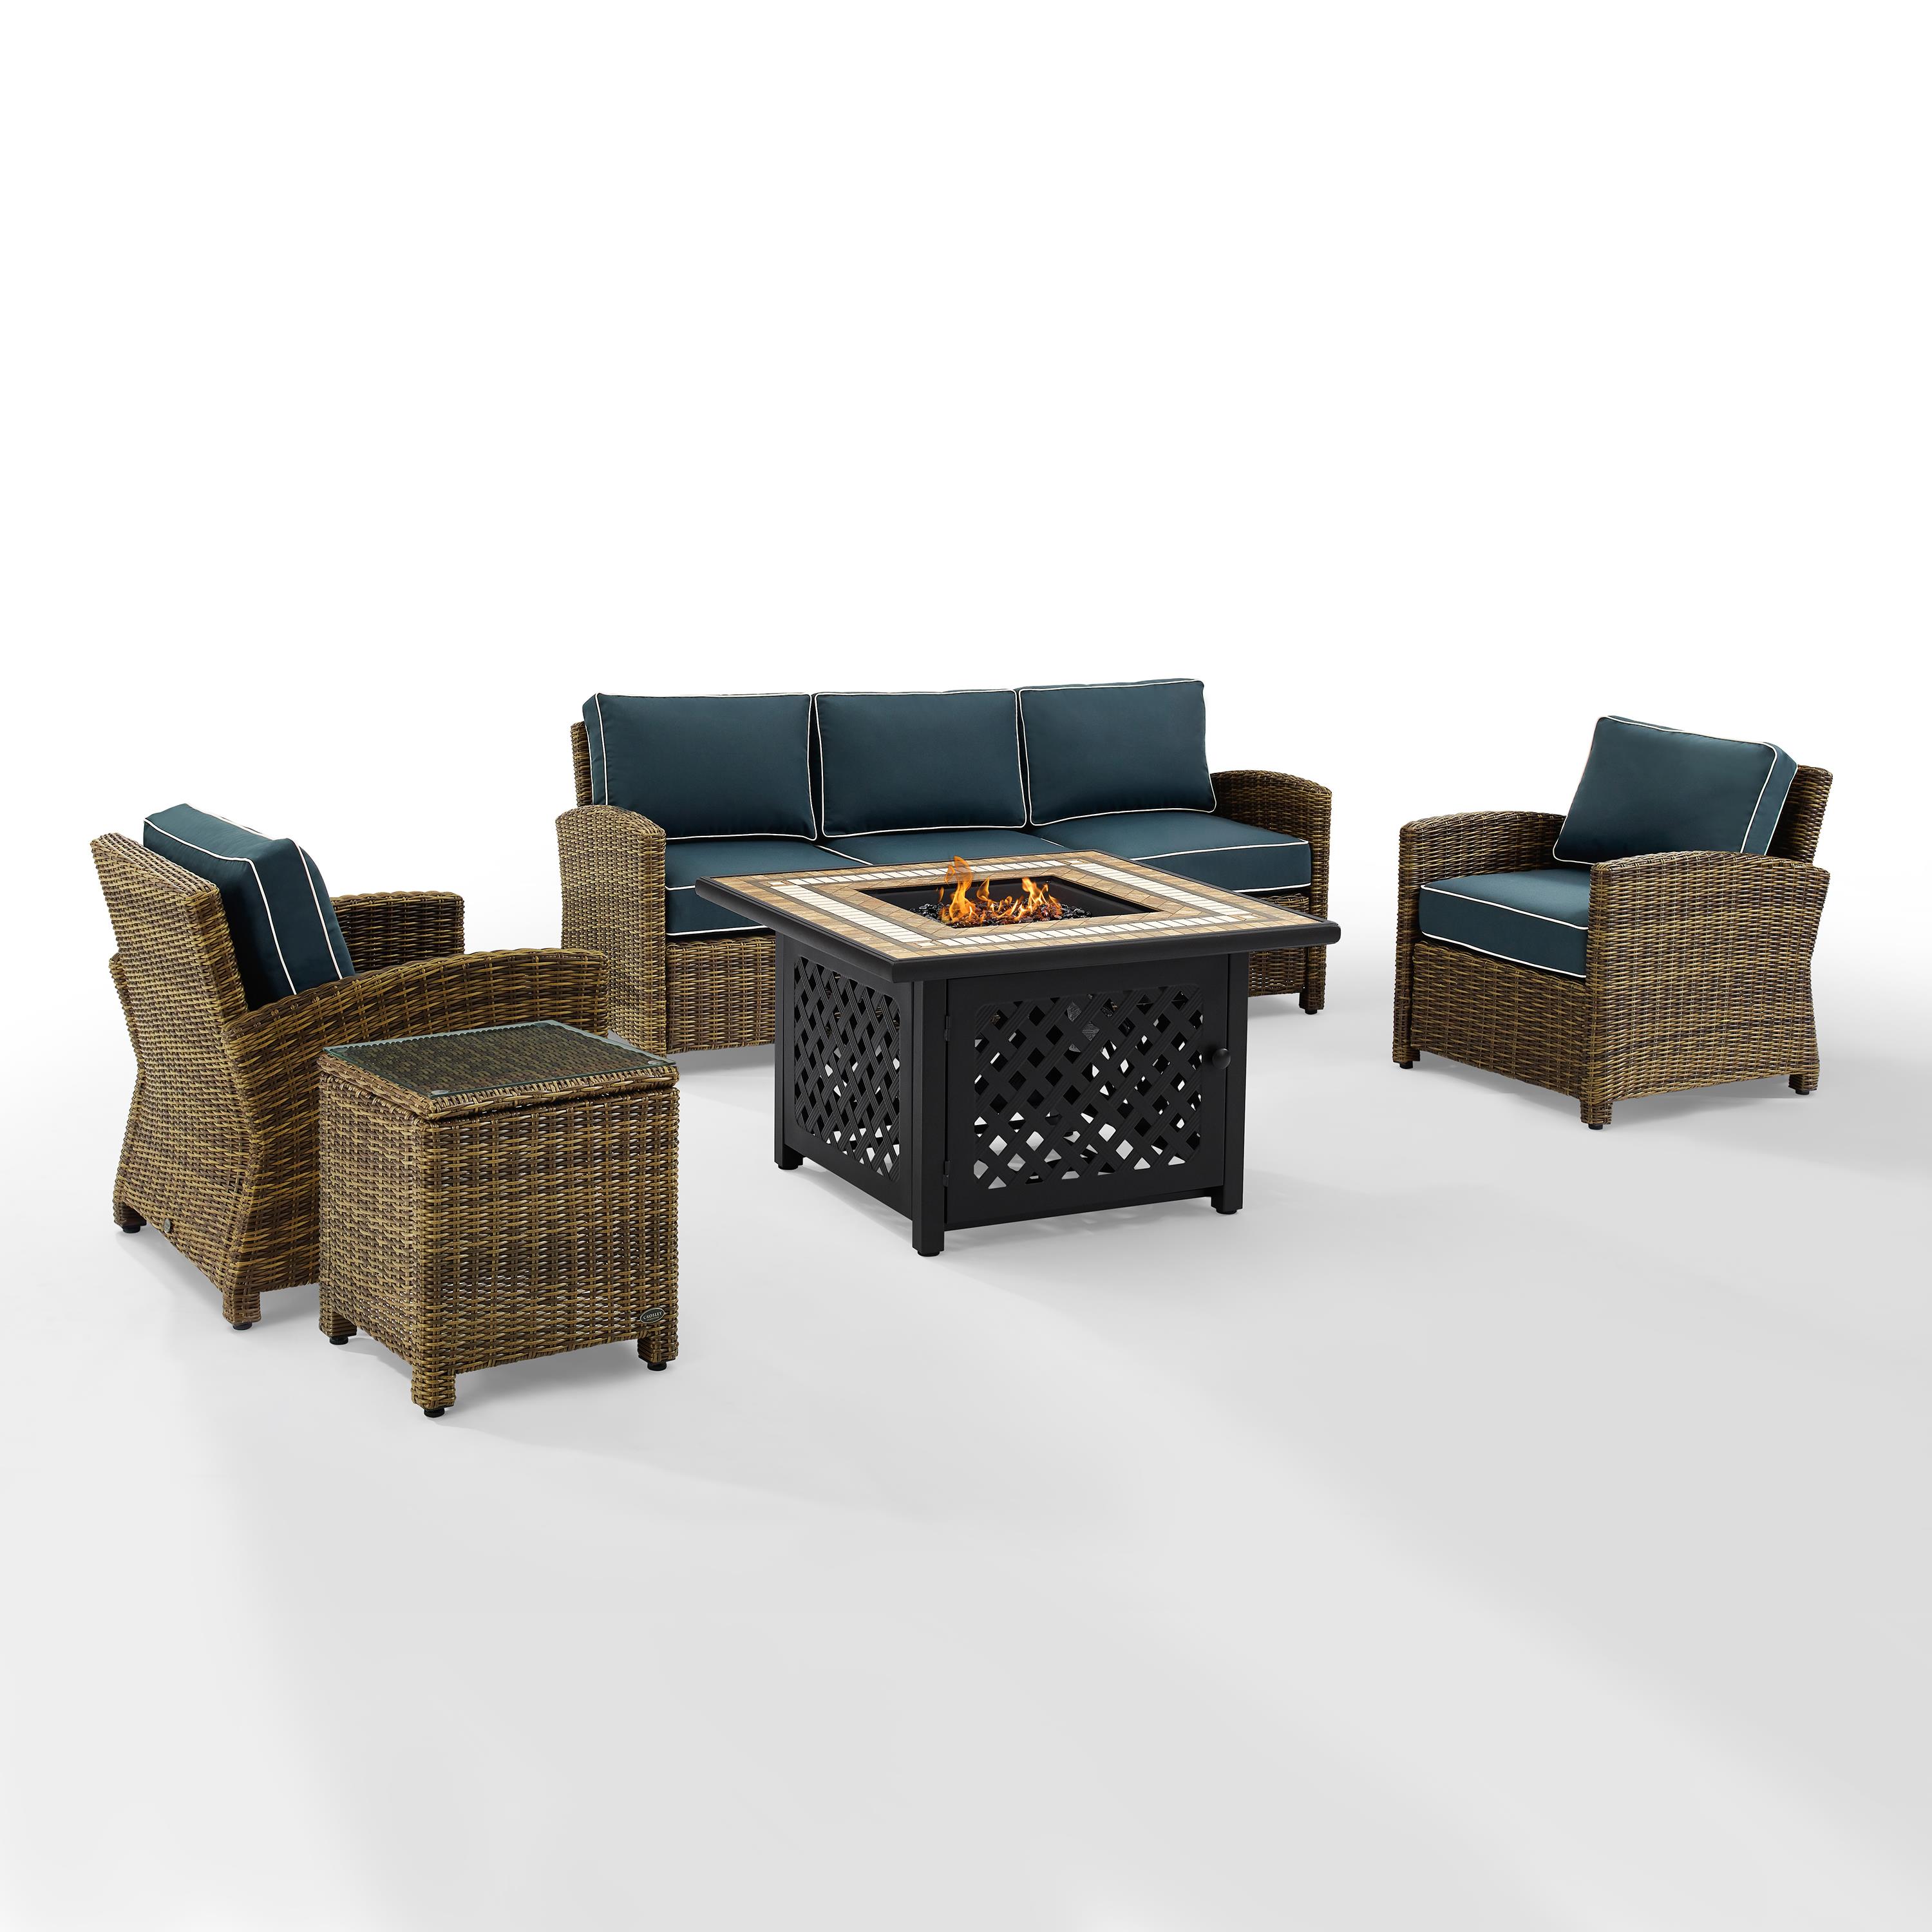 Crosley Furniture Bradenton 5Pc Patio Fabric Fire Pit Sofa Set in Brown and Navy - image 3 of 9